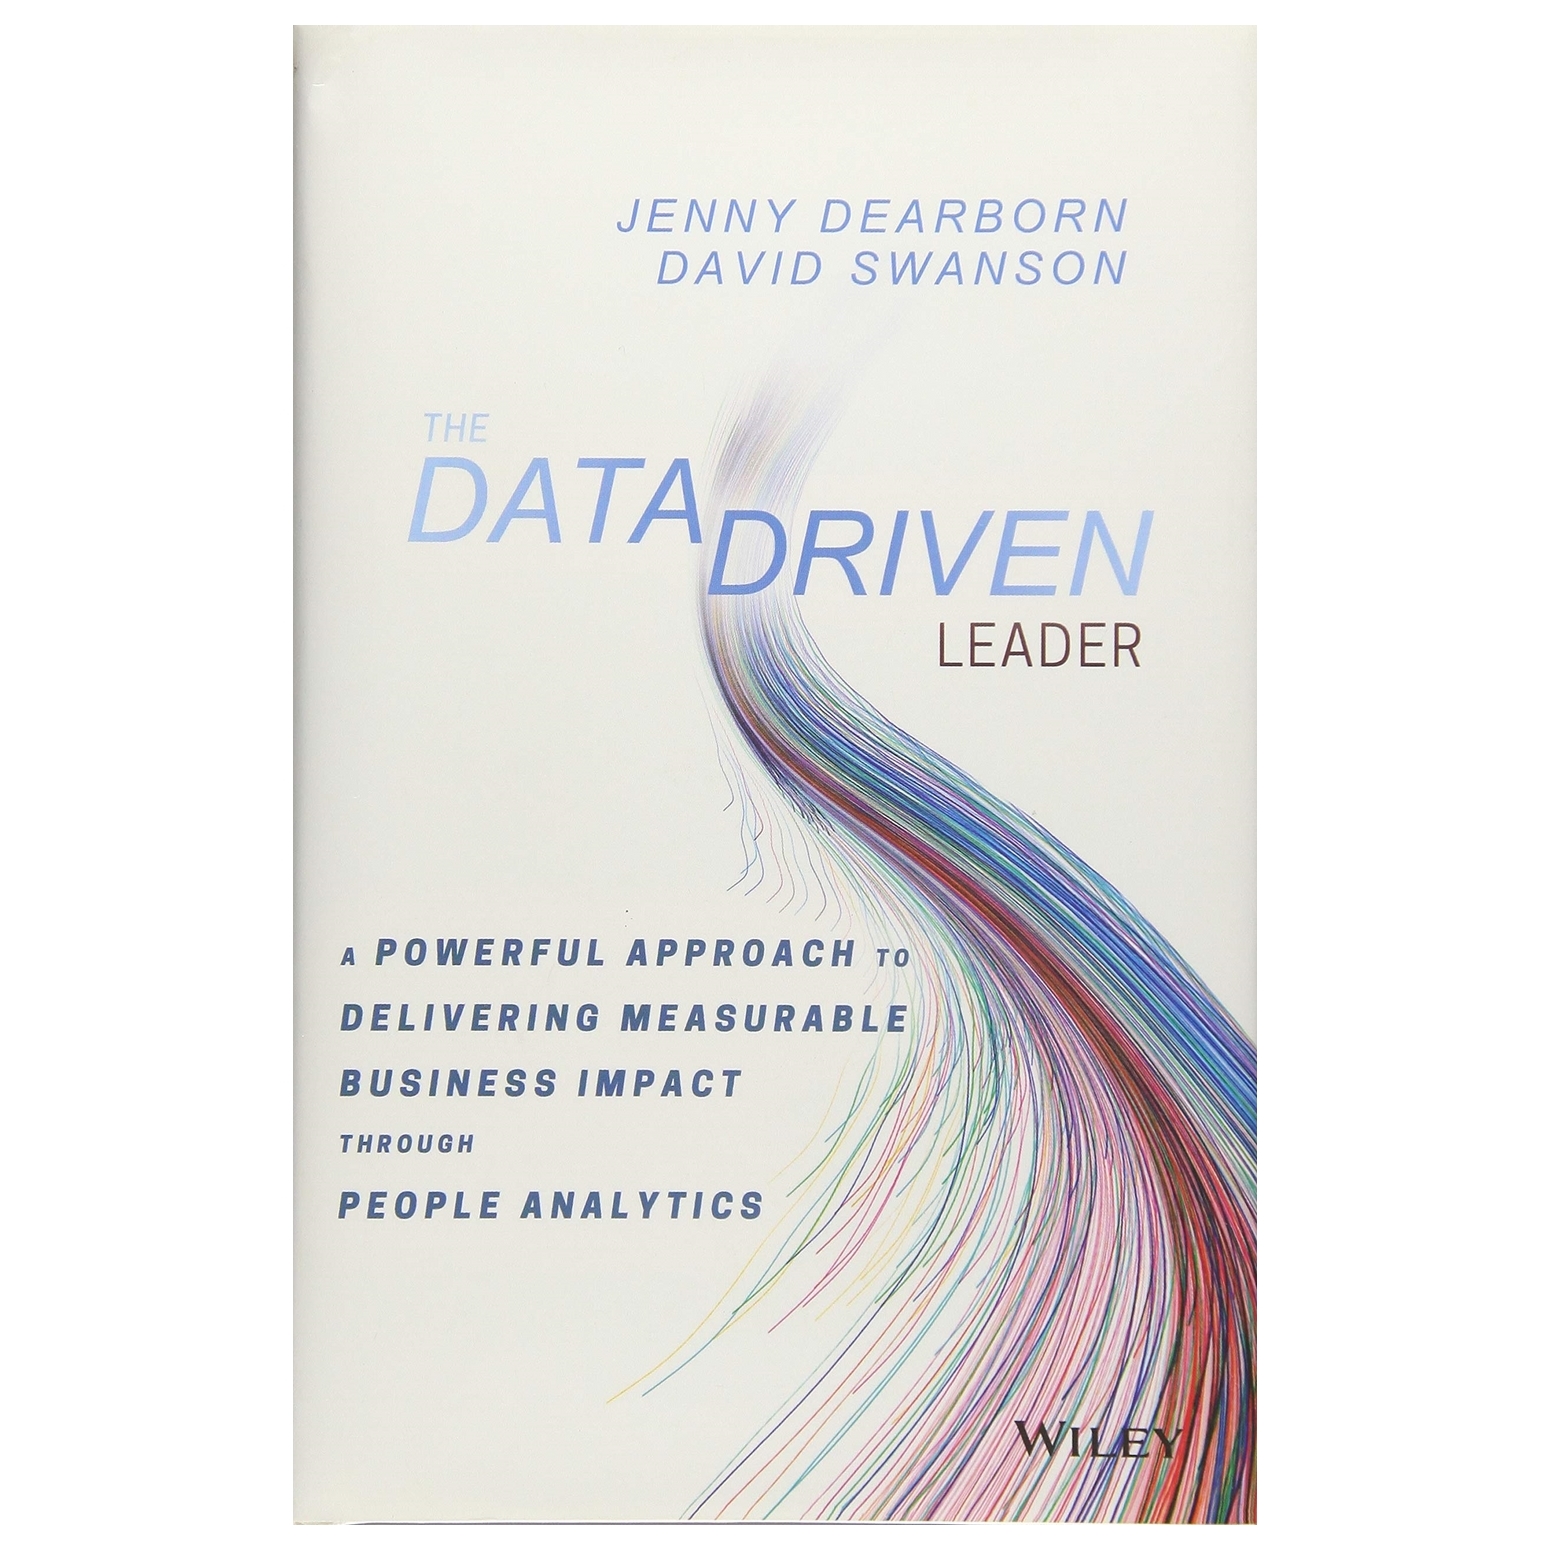 The Data Driven Leader: A Powerful Approach To Delivering Measurable Business Impact Through People Analytics